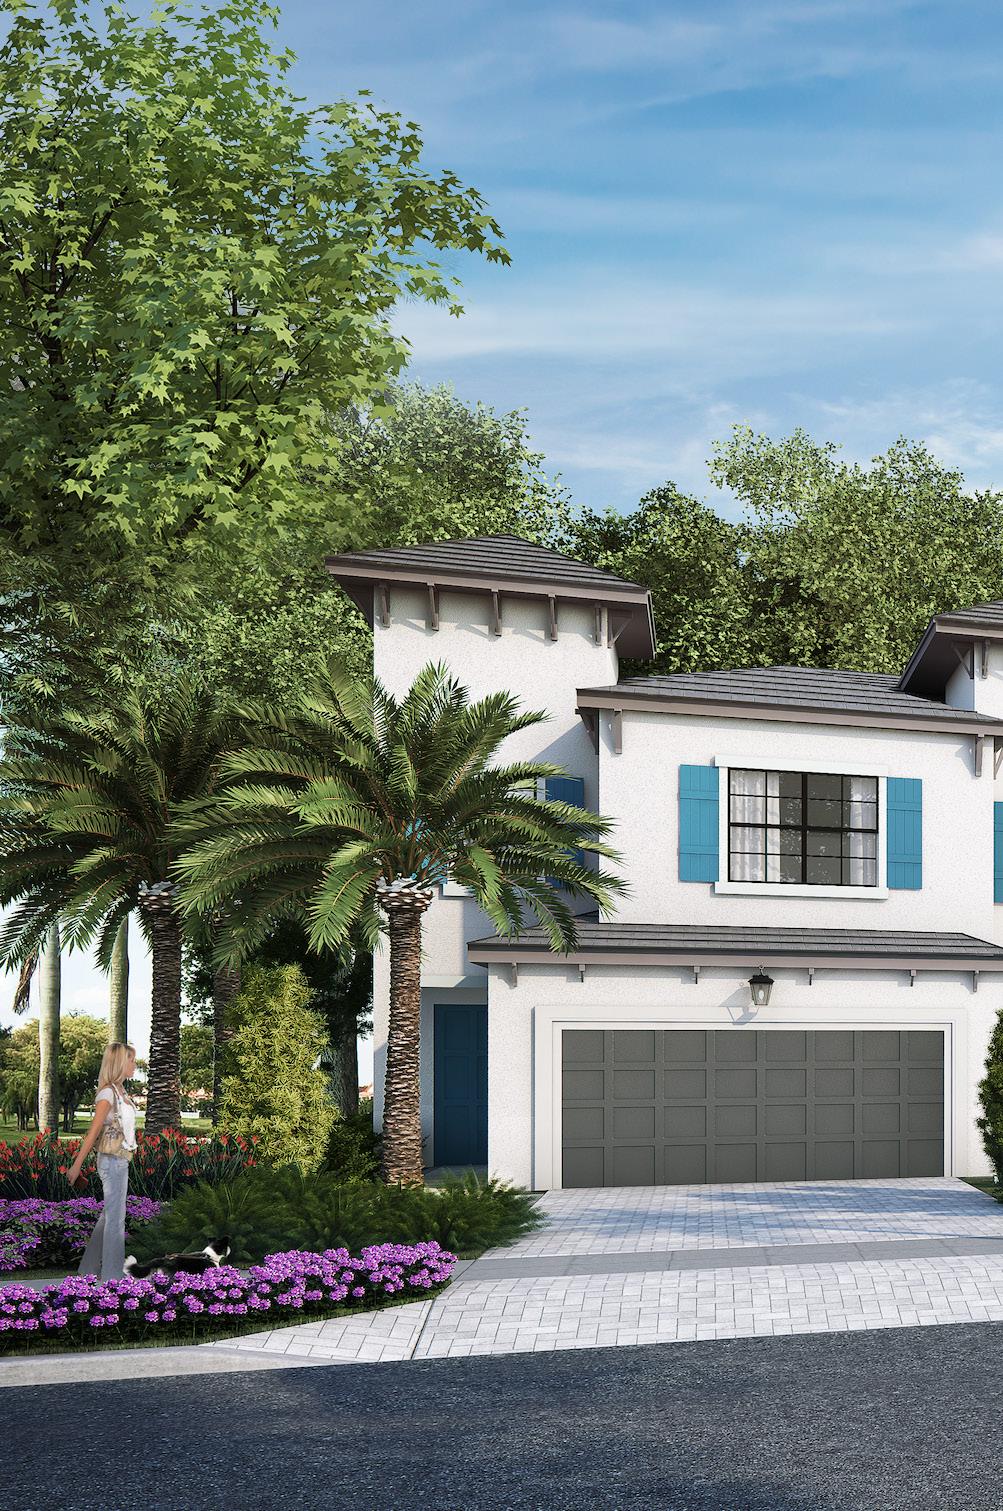 WELCOME Accentuated by the warm, welcoming architecture of classic British West Indies style, Vanderbilt Reserve is an exclusive collection of townhomes beckoning to be discovered.